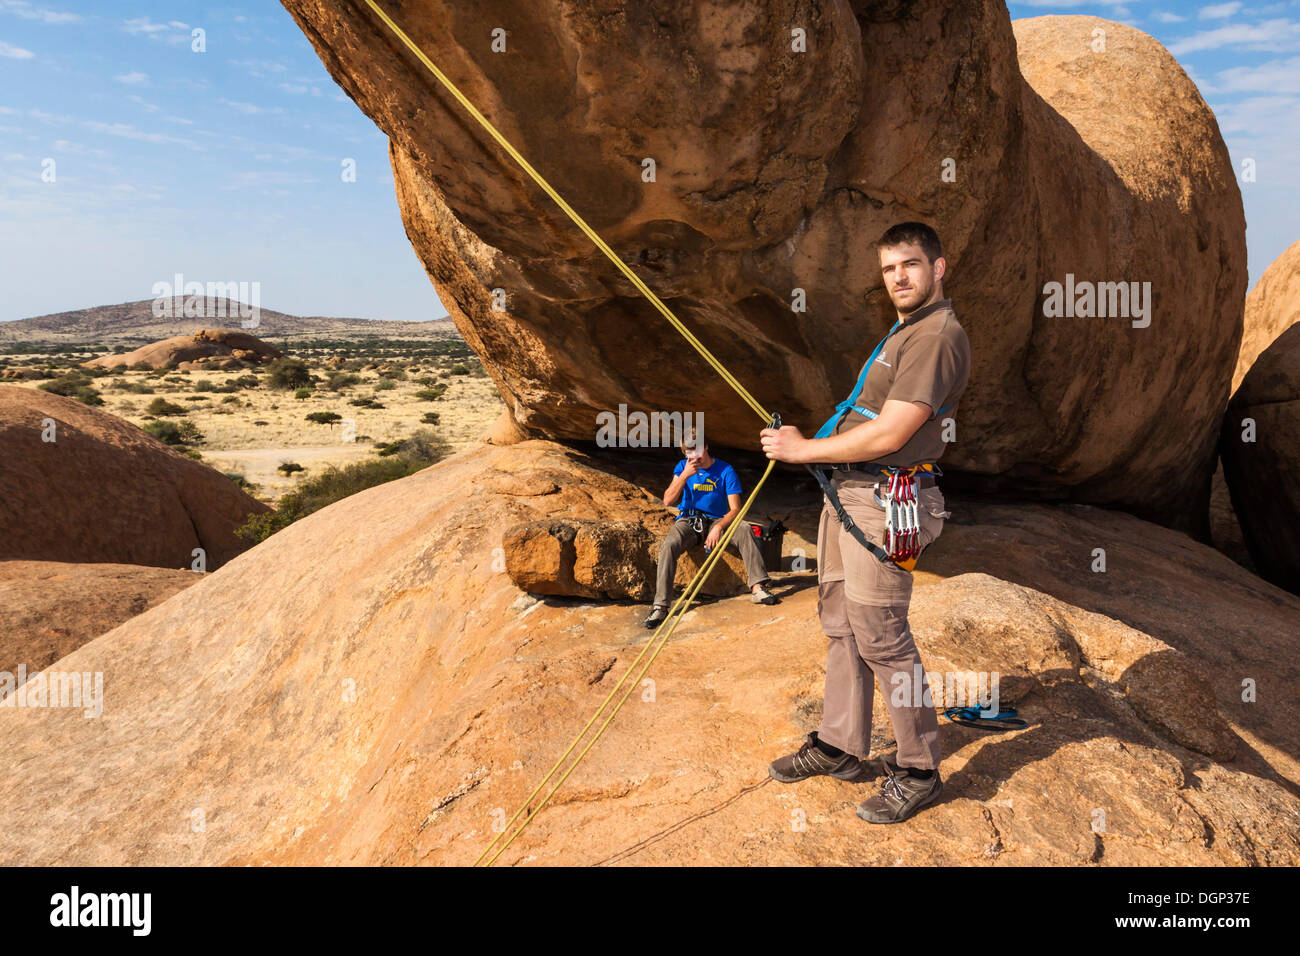 Young man hanging in a climbing rope, Bogenfels, Spitzkoppe area, Namibia, Africa Stock Photo